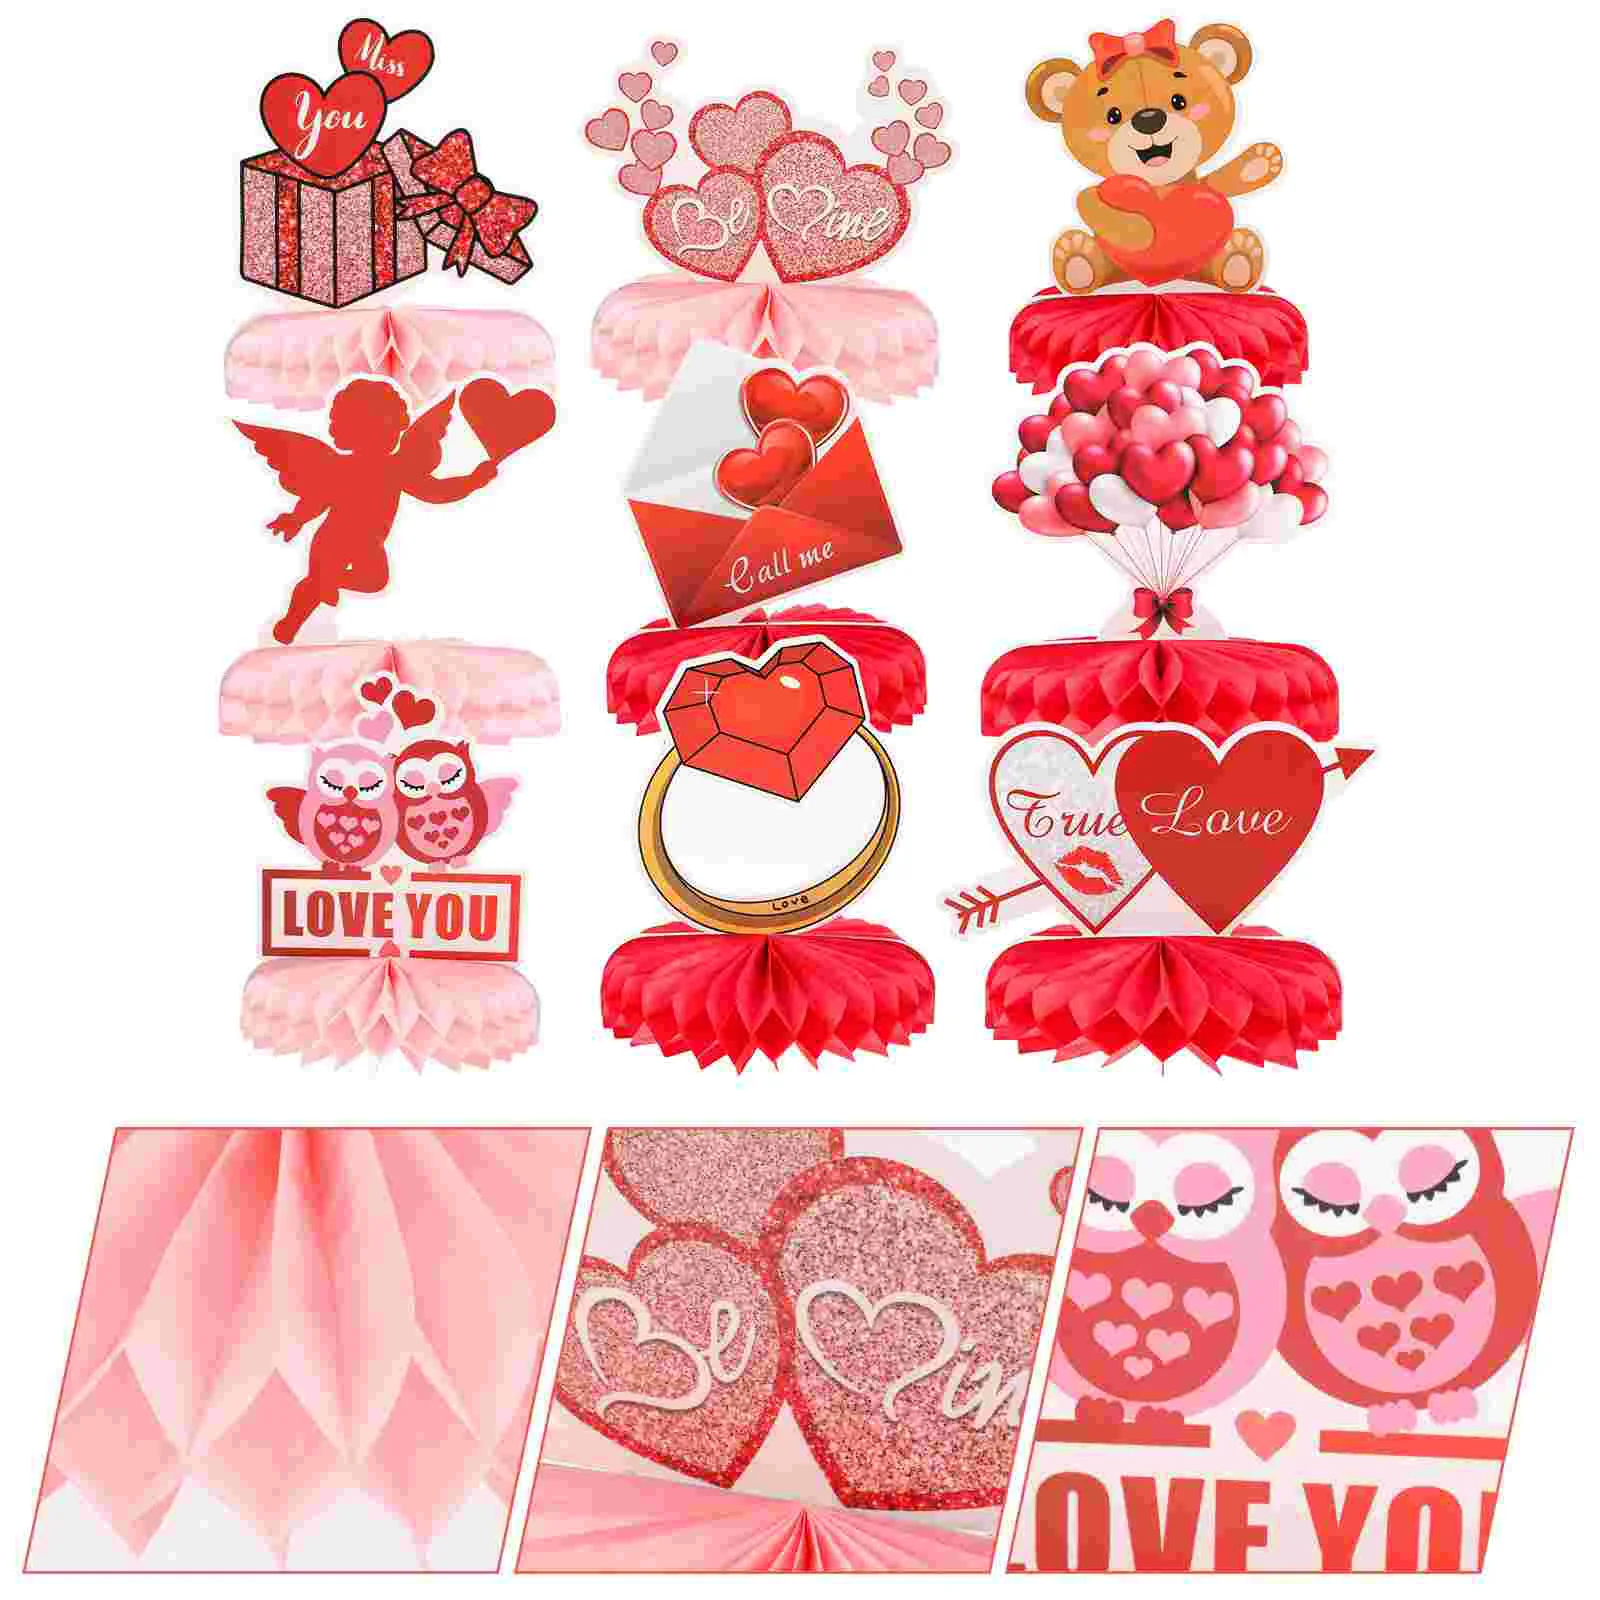 

Valentines Day Table Centerpiece Honeycomb Decor Centerpieces Valentine S Heart Party Decorations Supplies Wedding Toppers